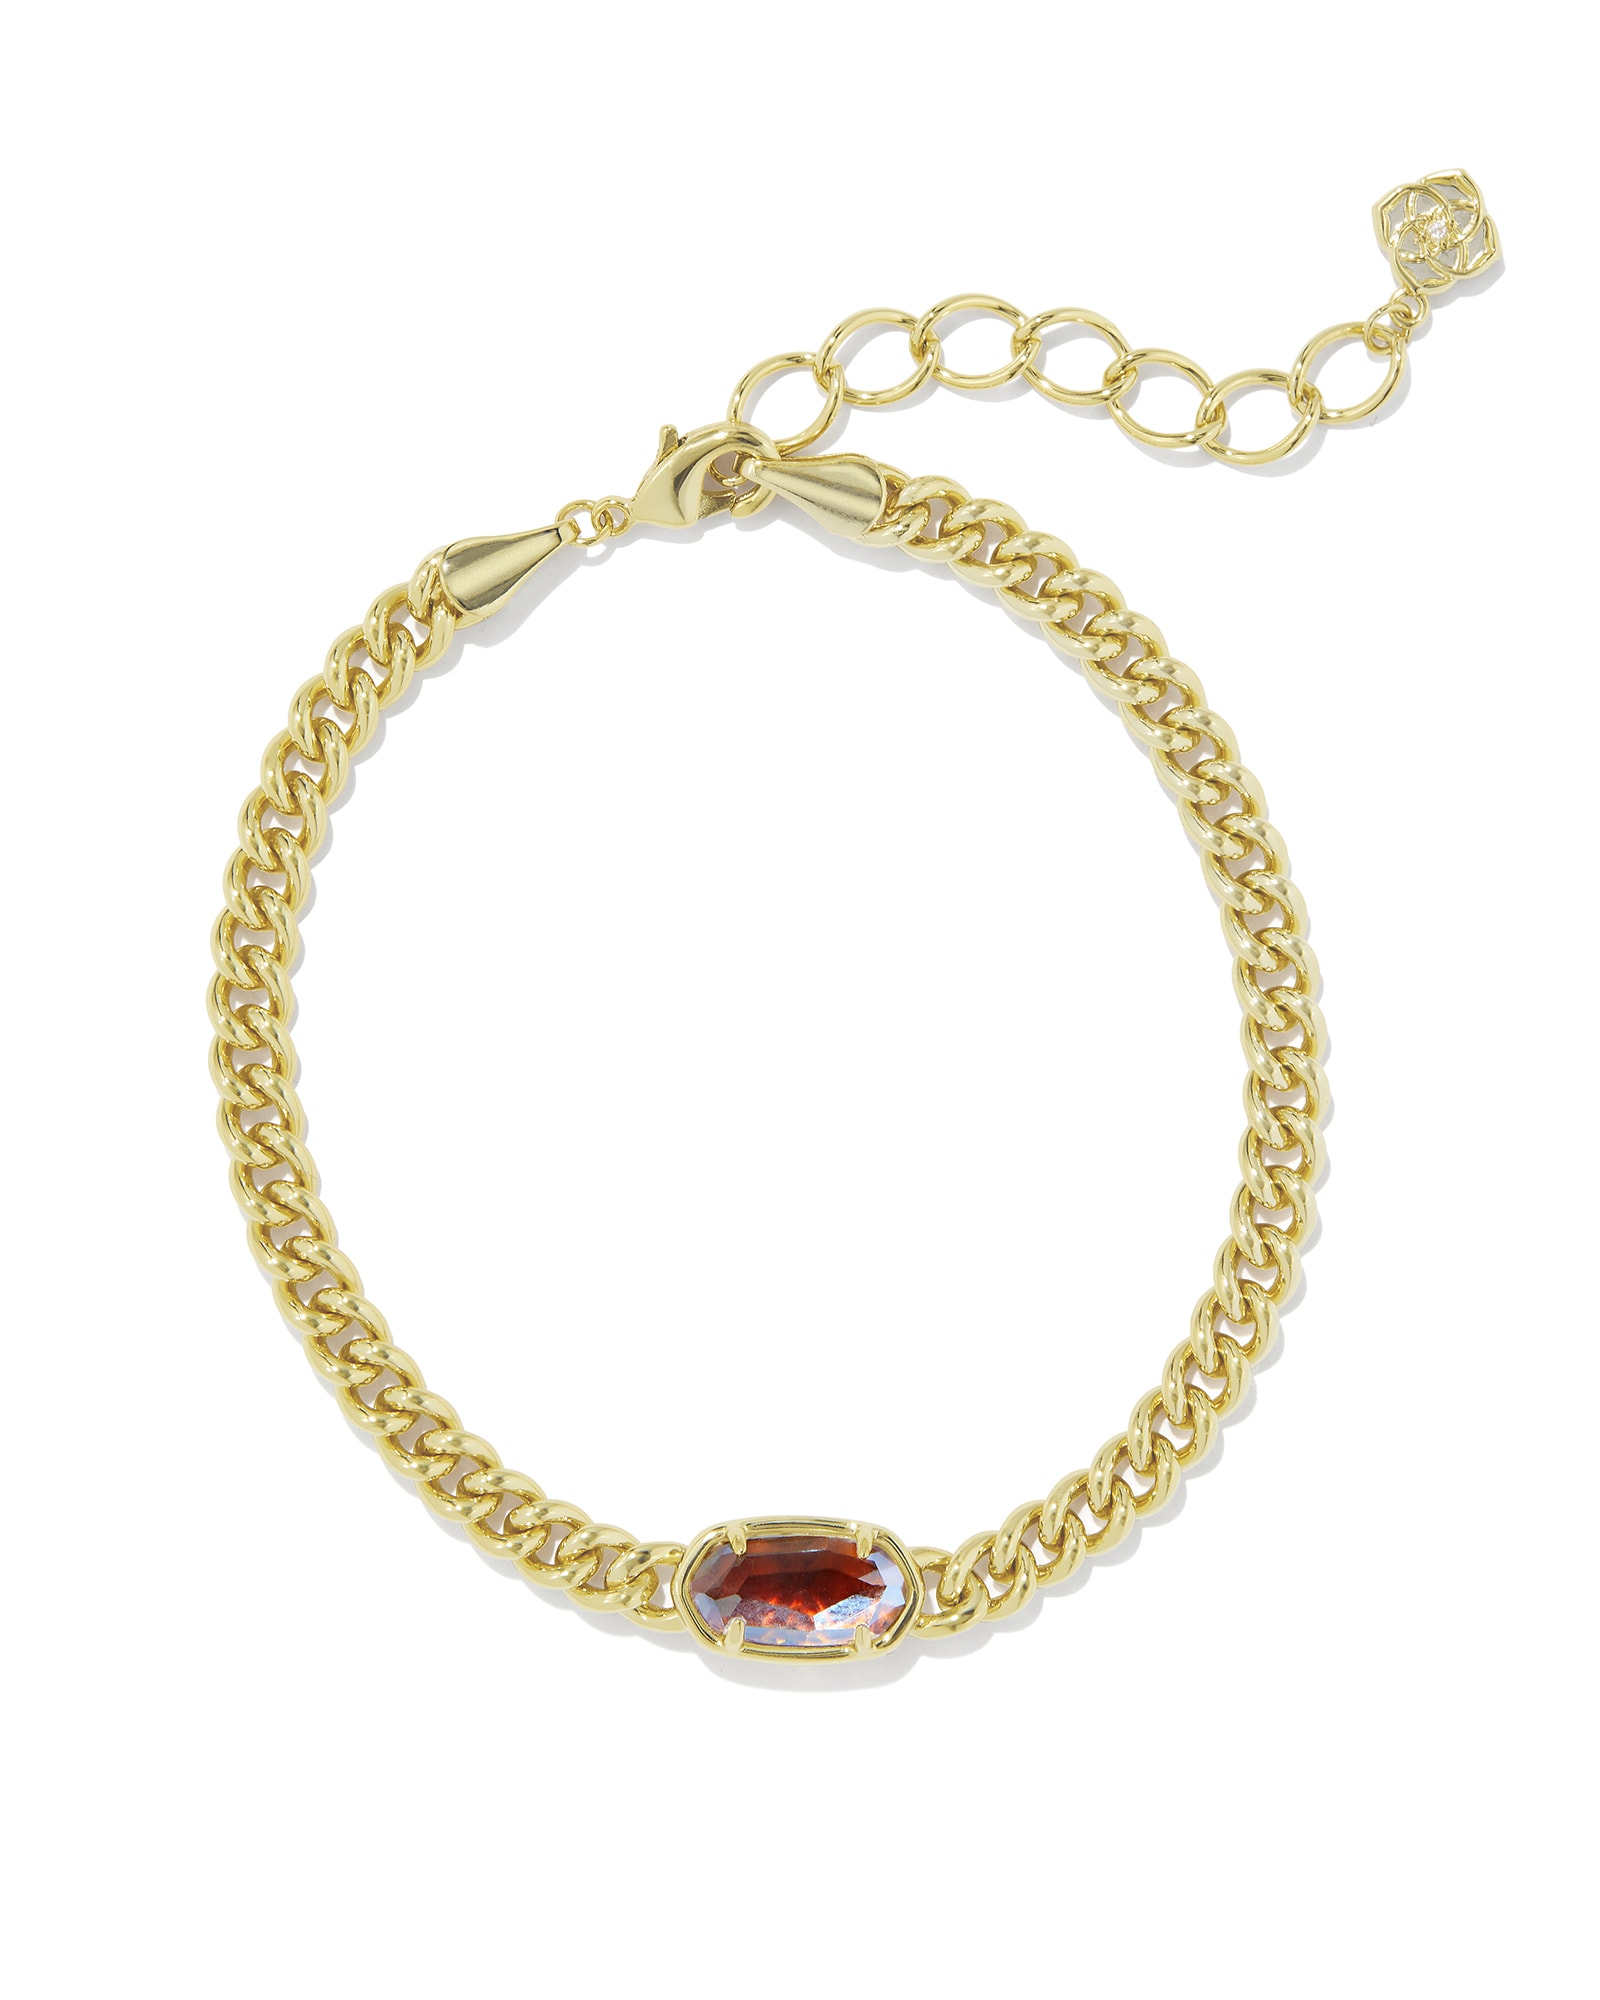 Grayson Gold Delicate Link and Chain Bracelet in Dichroic Glass